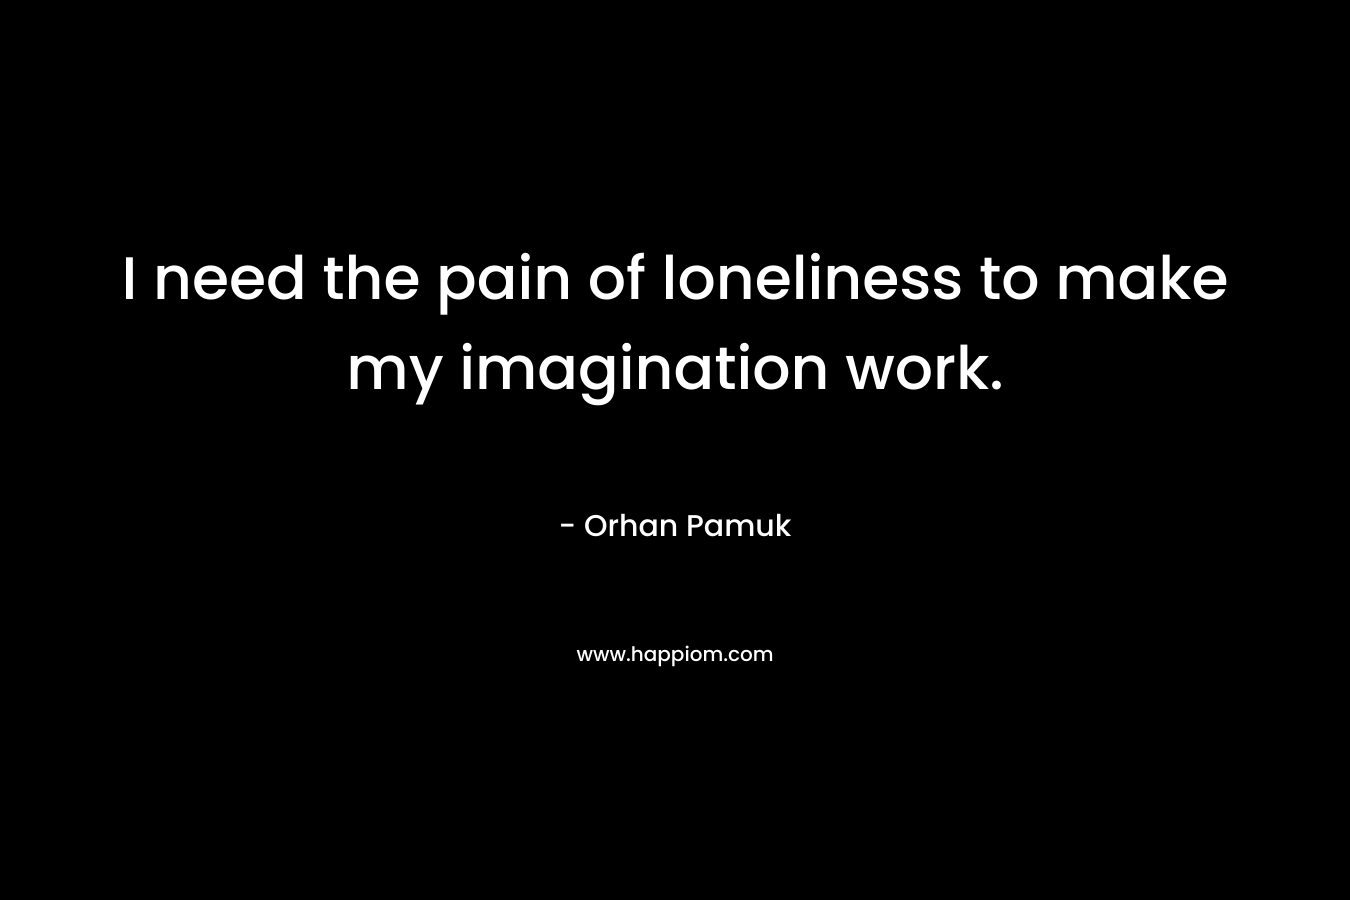 I need the pain of loneliness to make my imagination work.